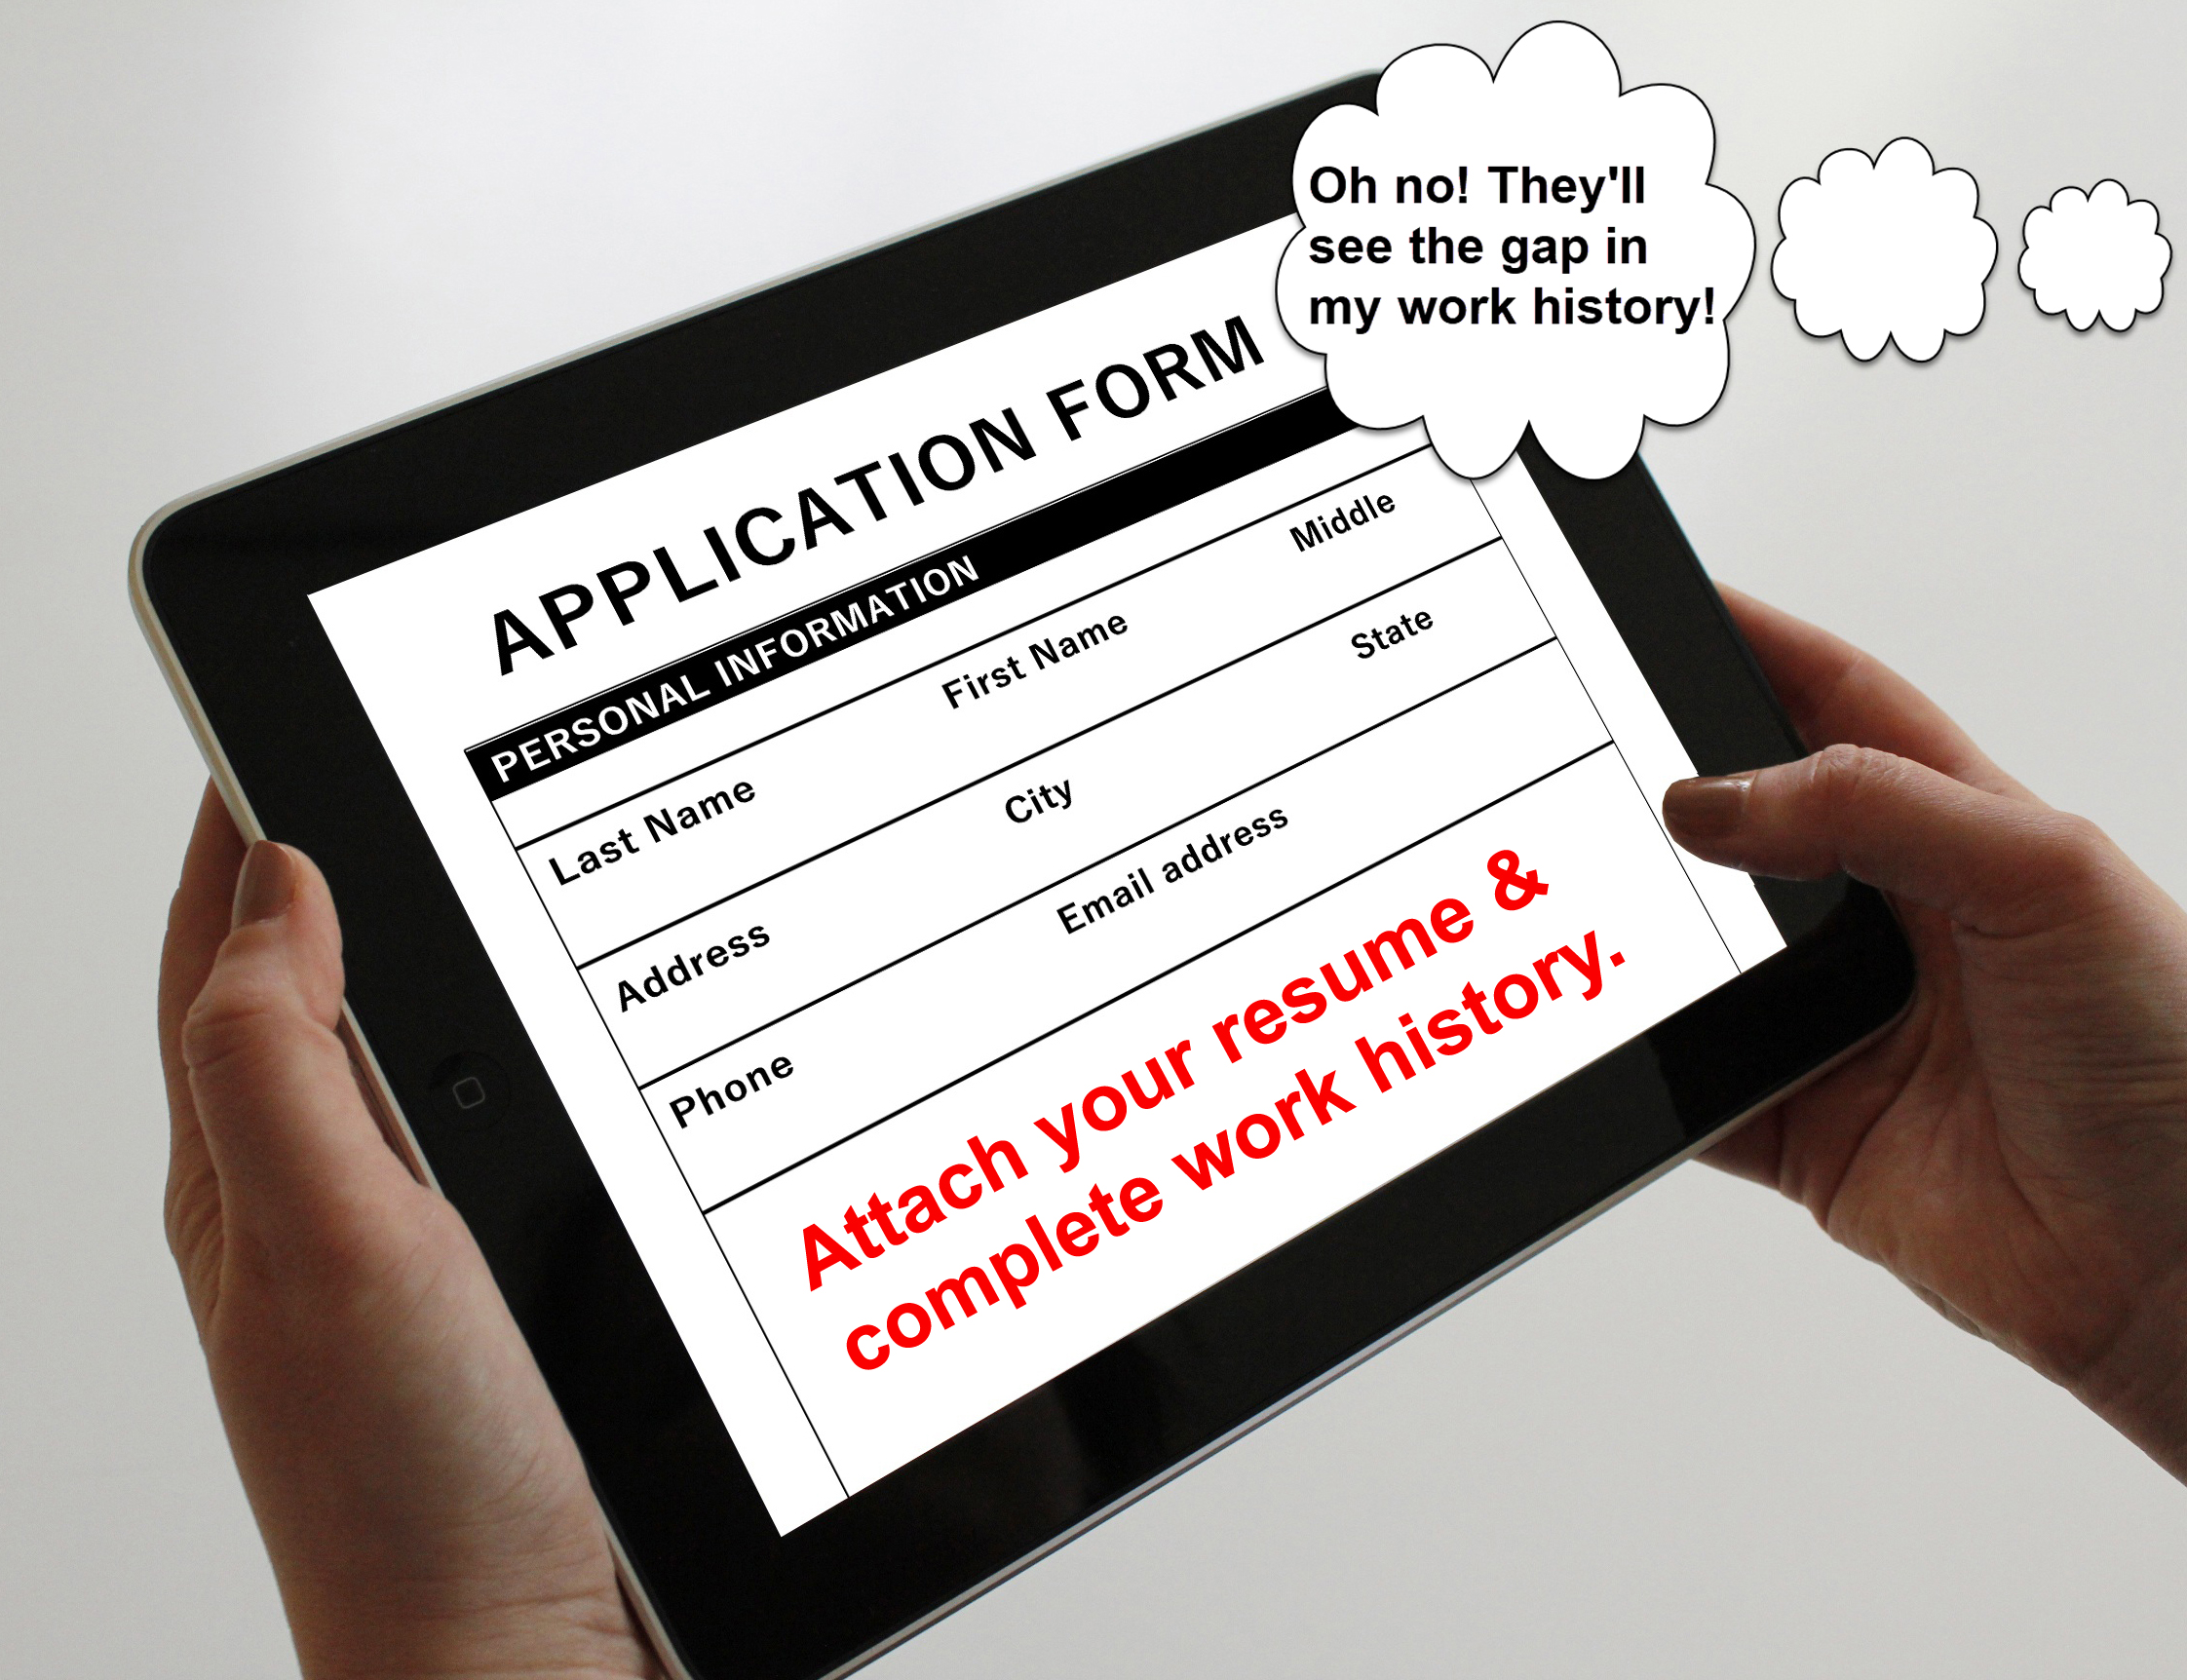 Online application form and person concerned about gap in employment history.